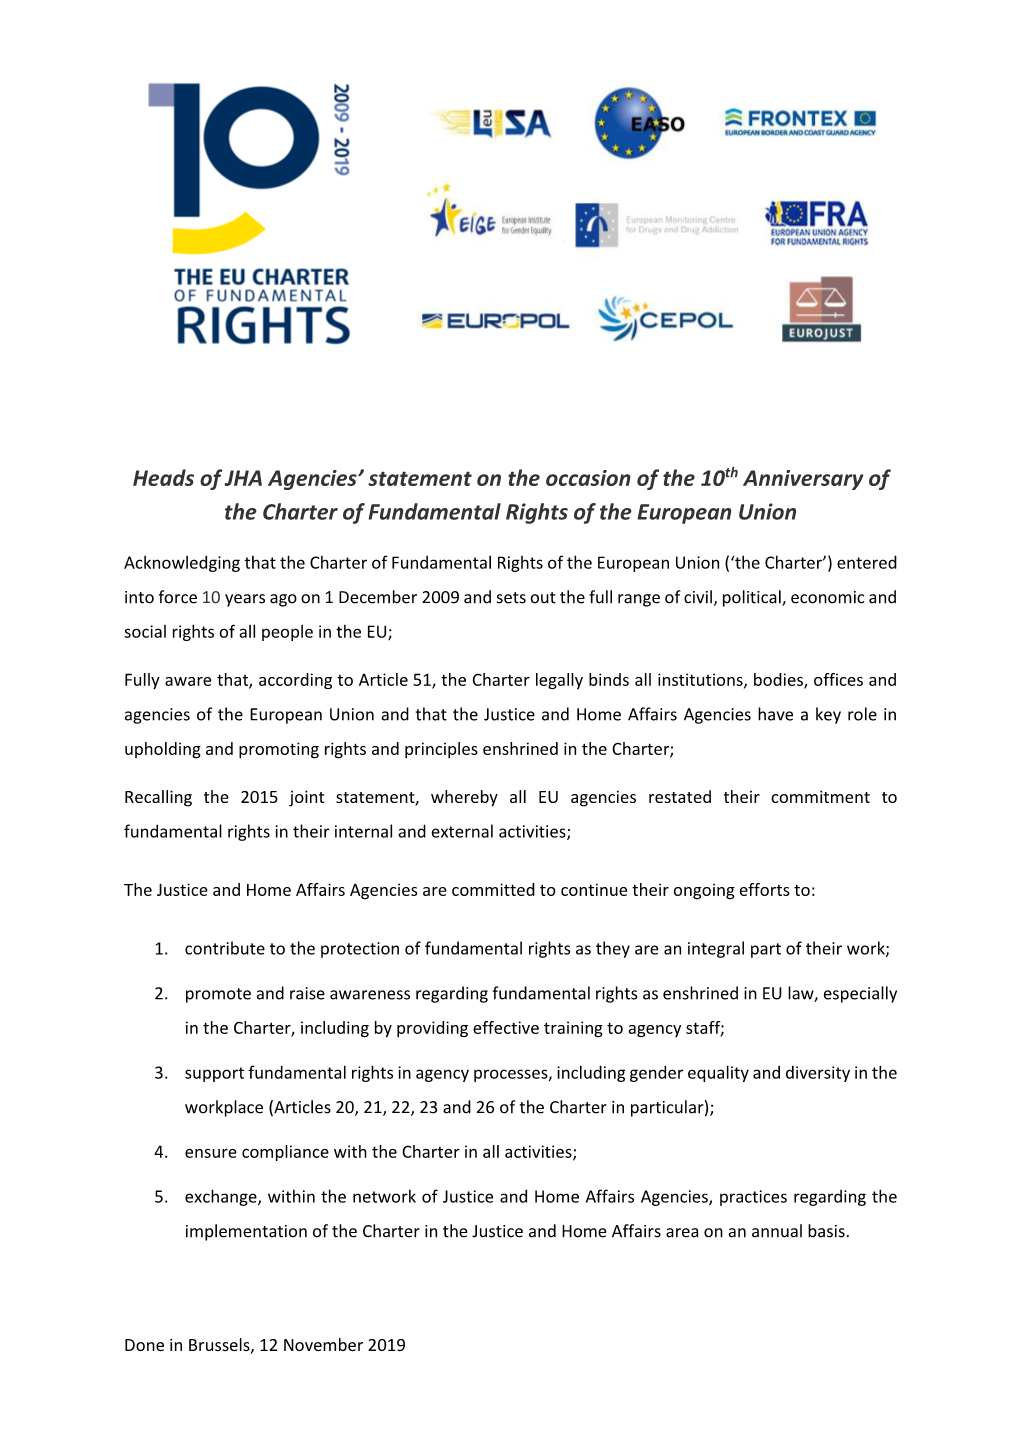 Heads of JHA Agencies' Statement on the Occasion of the 10Th